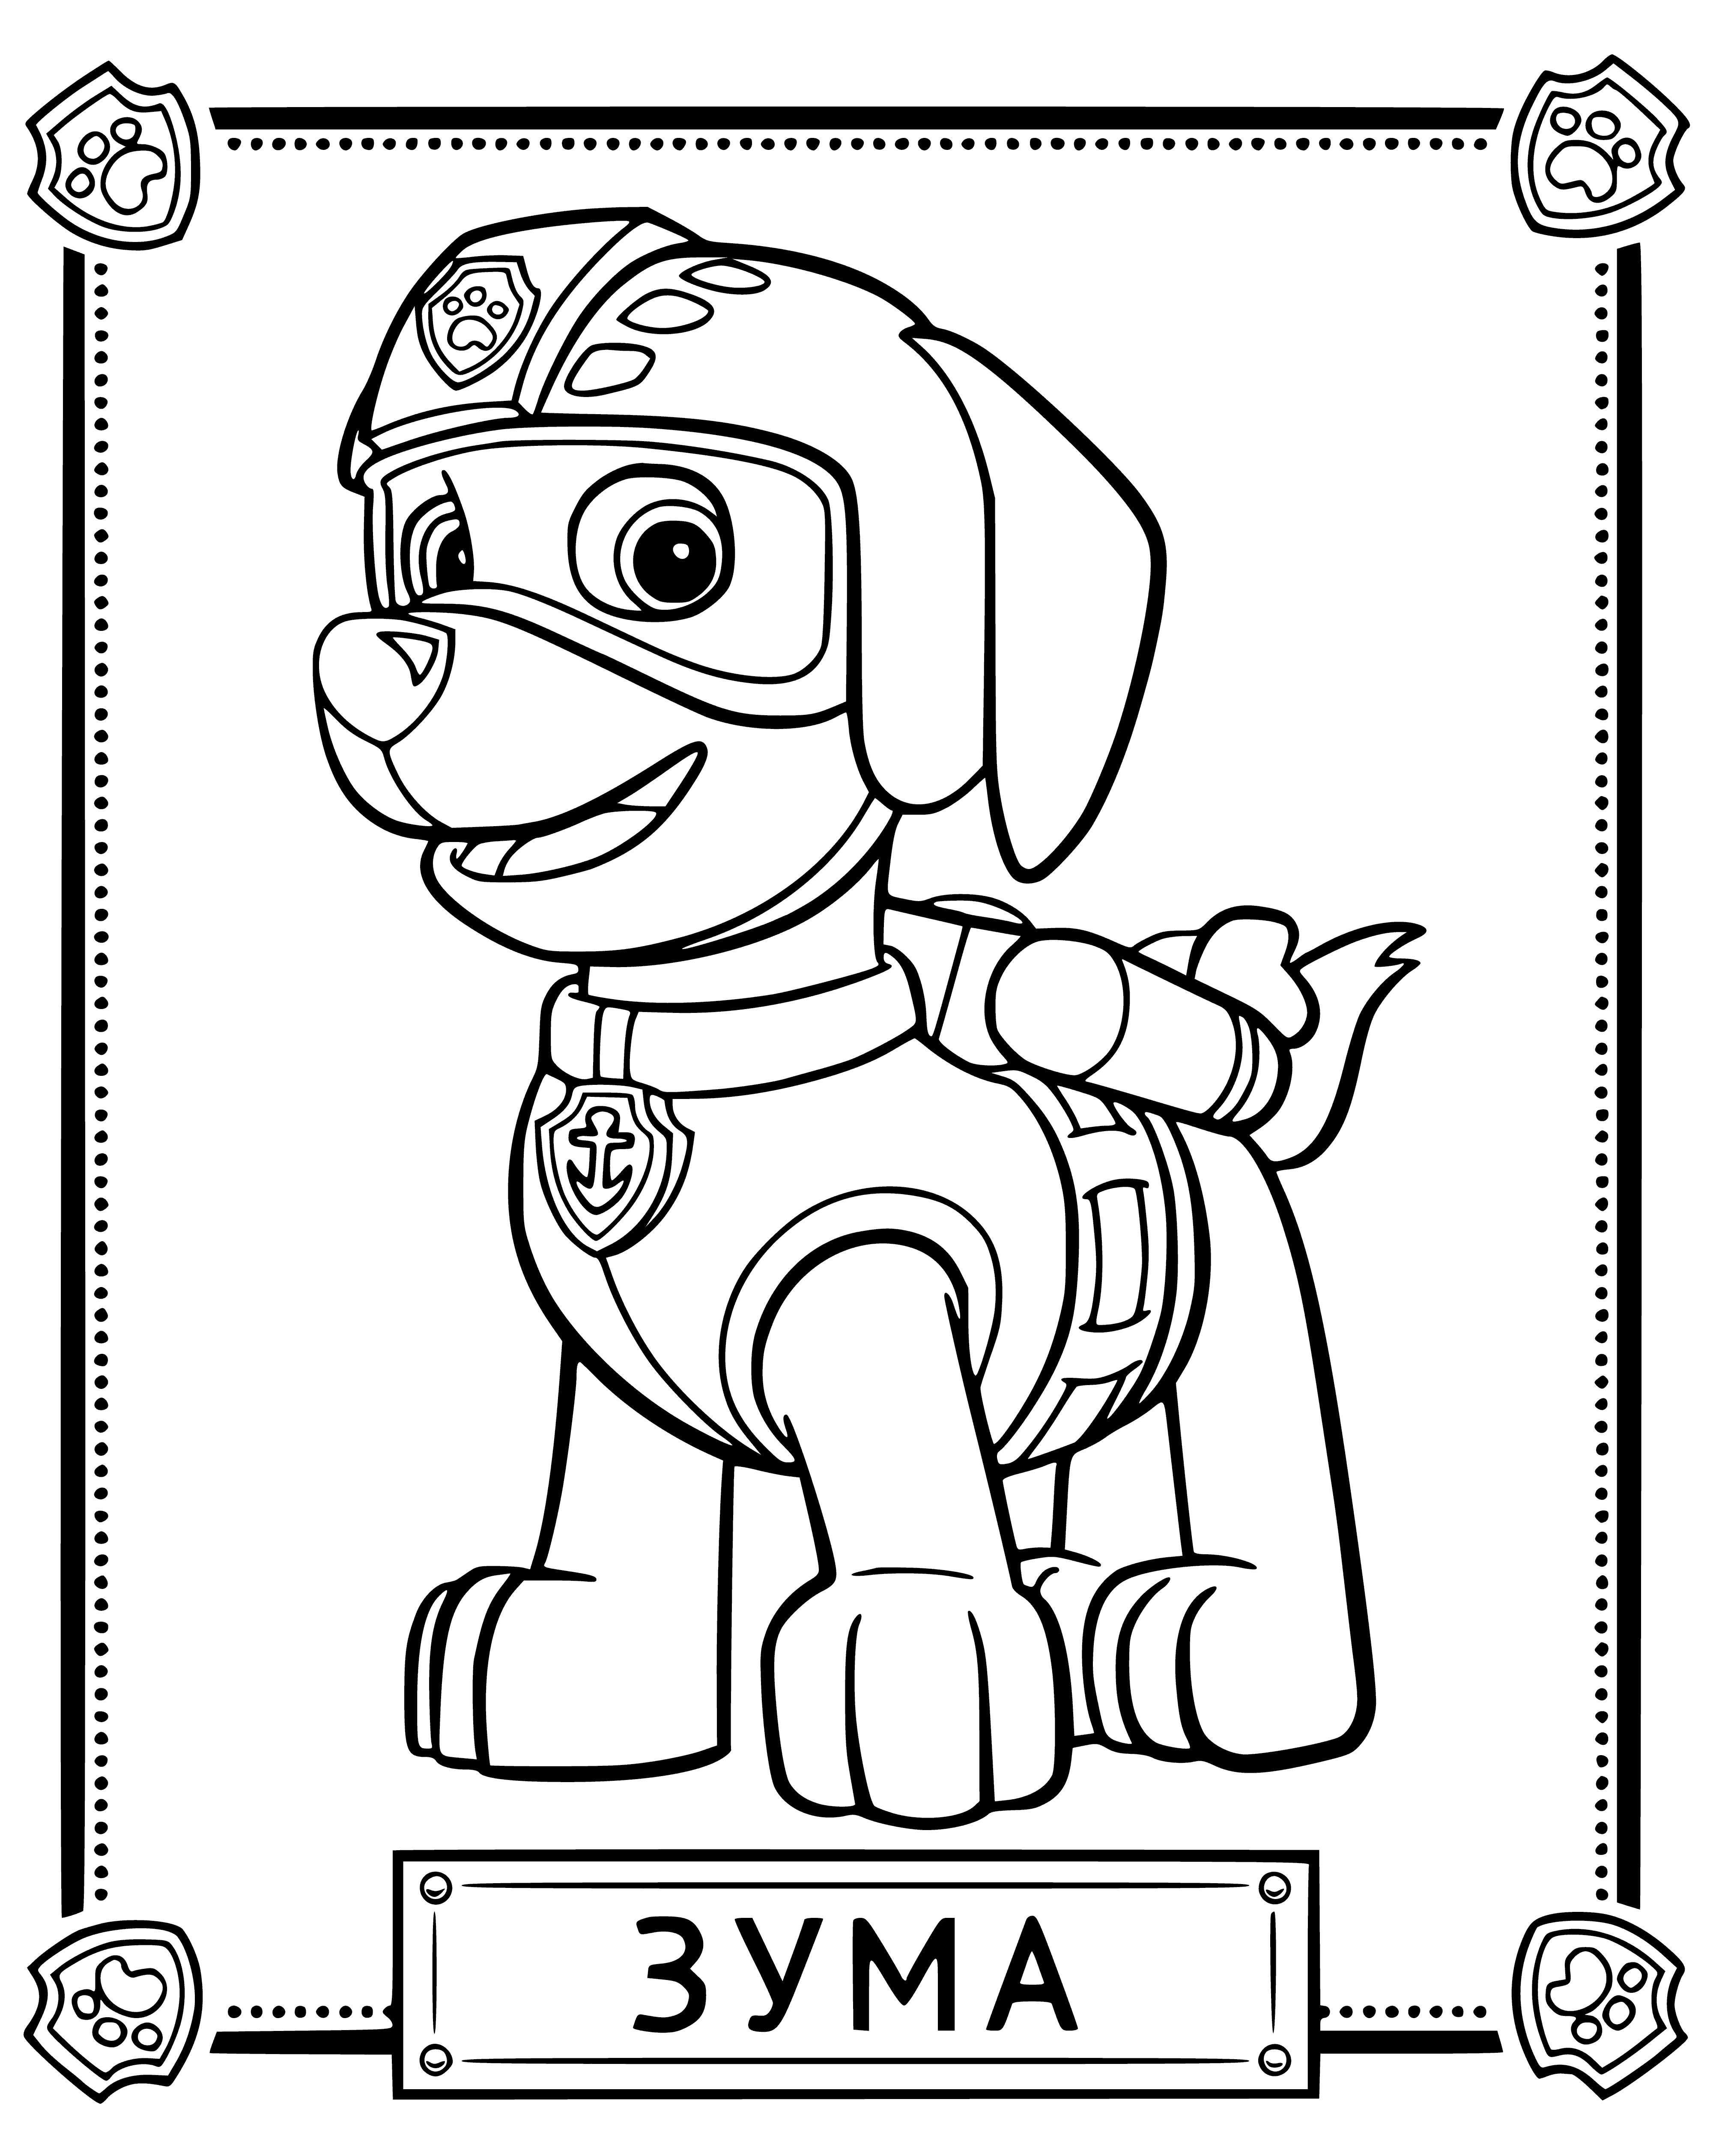 coloring page: The PAW Patrol's water rescue pup Zuma is always ready to dive into action and help on any mission! #PAWPatrol #Zuma